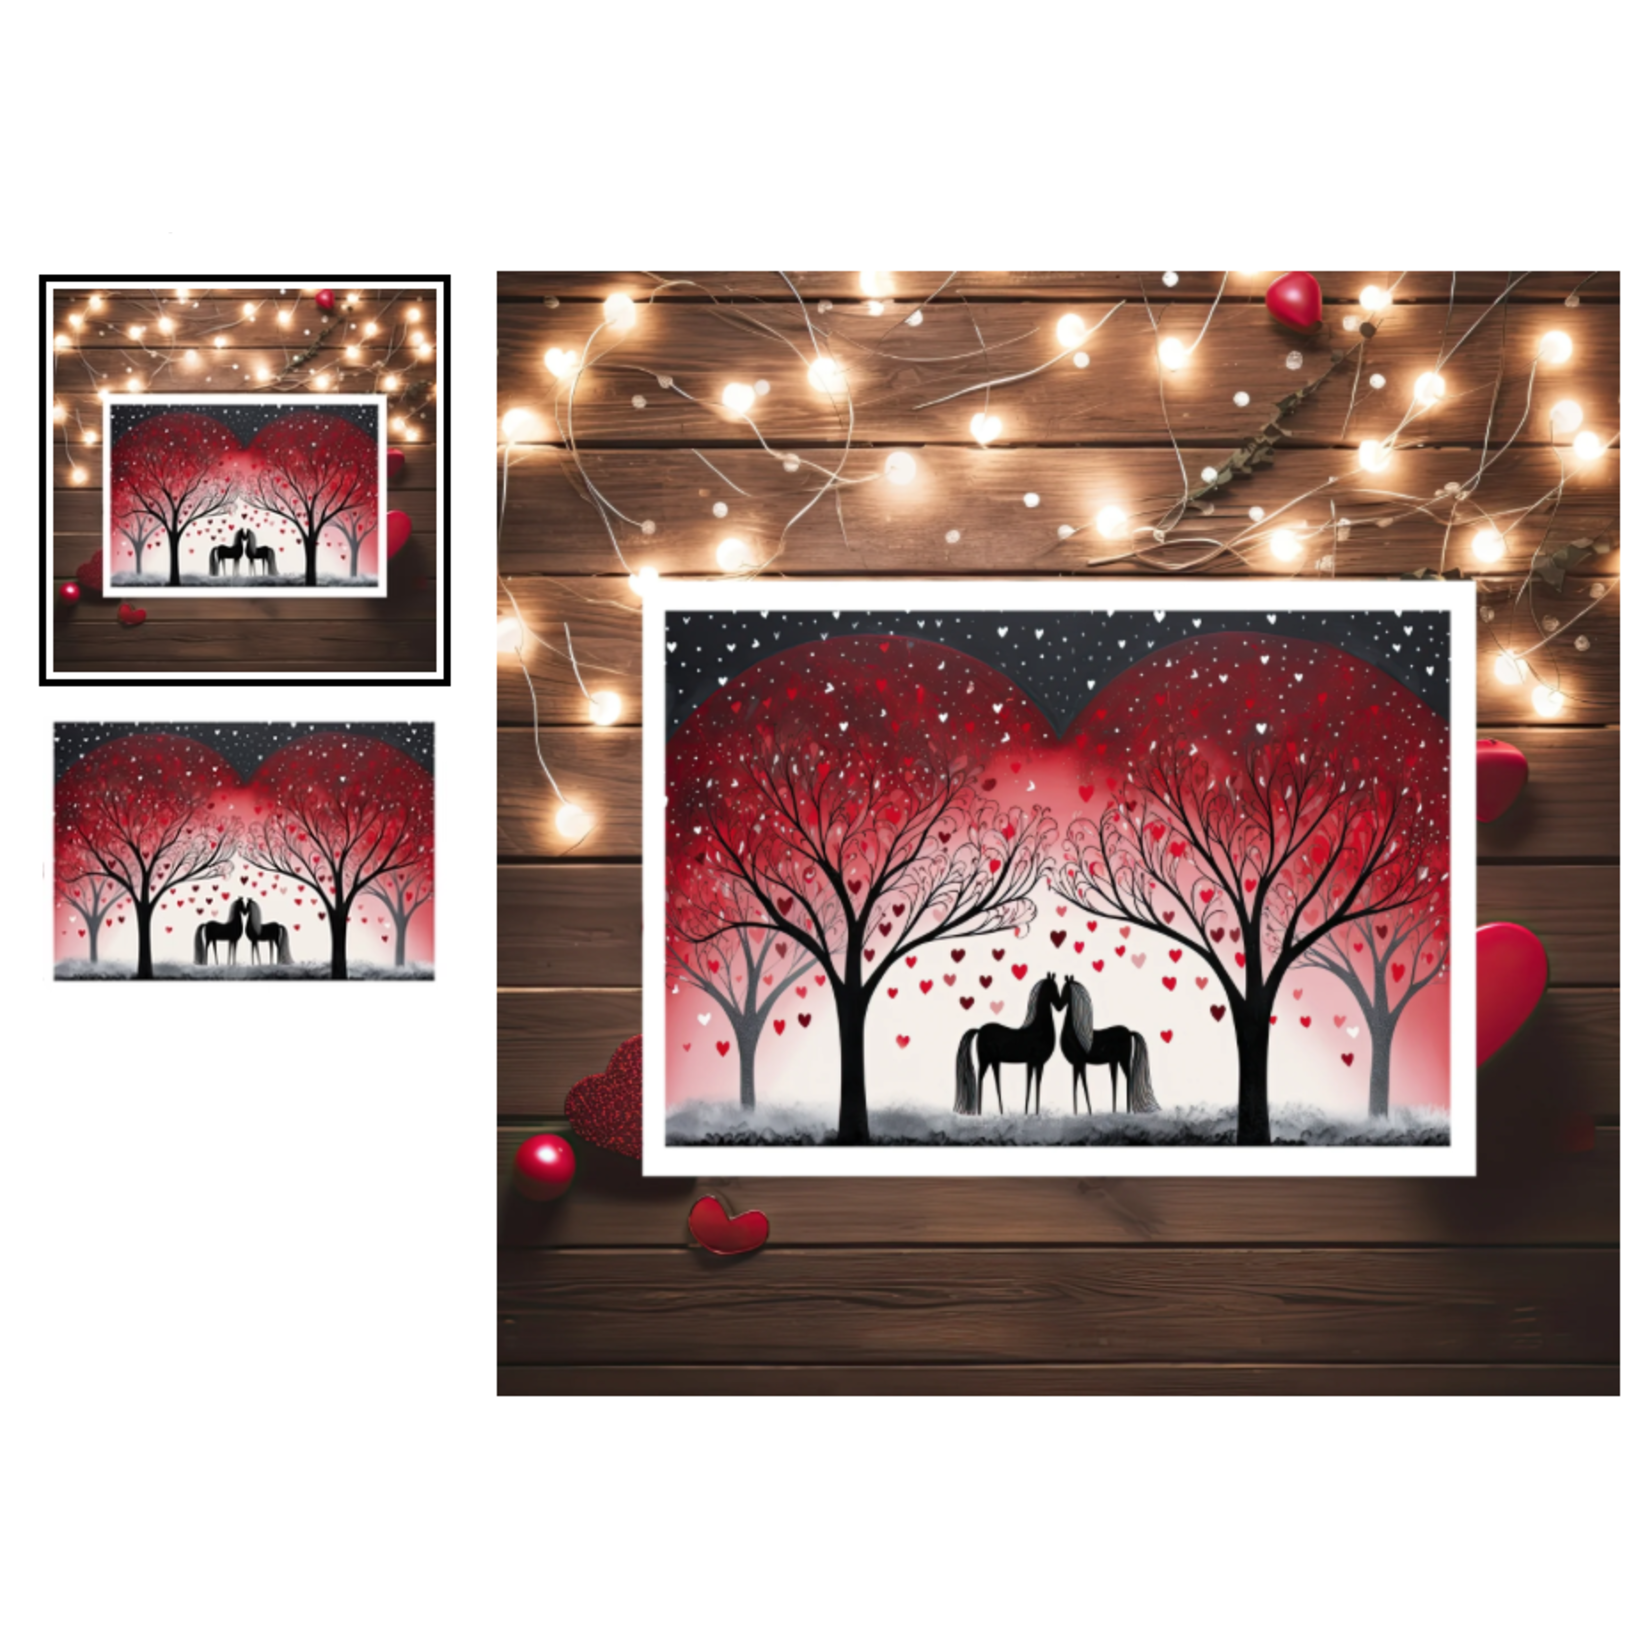 The Naughty Equestrian Starry Love: Romantic Horses Greeting Card